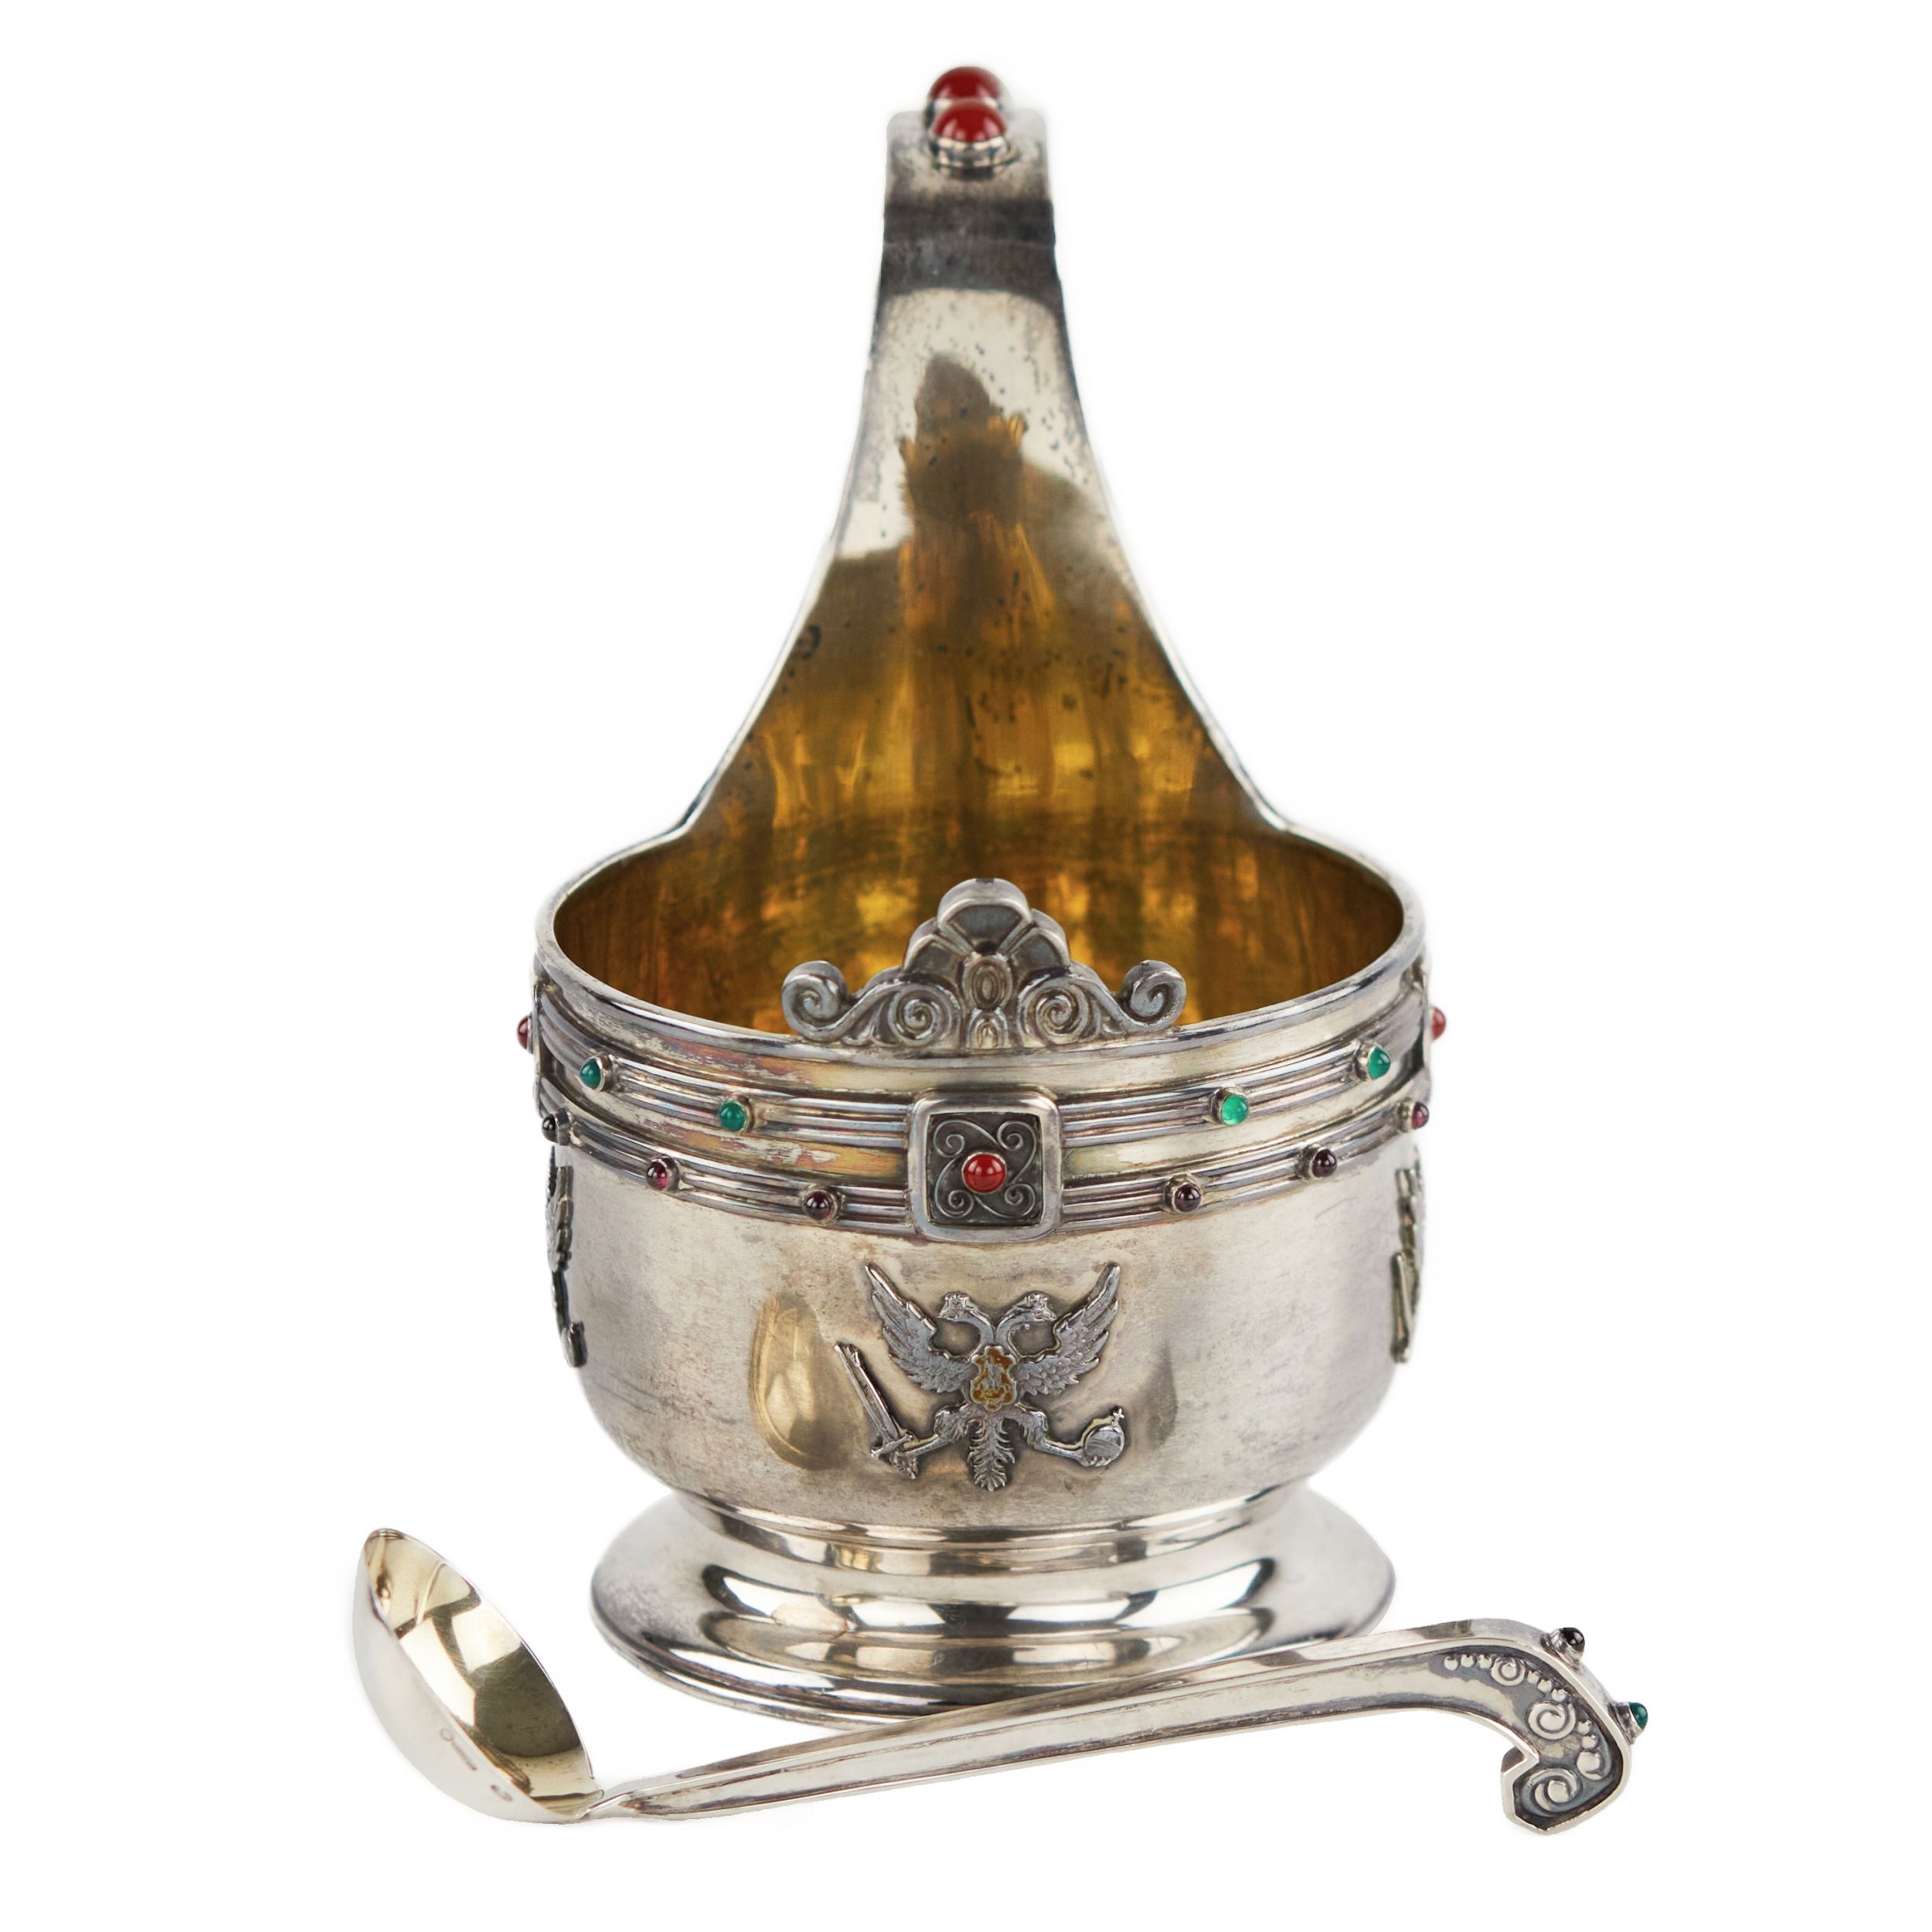 Large silver kovsh in Art Nouveau style by Faberge. Yuliy Rappoport. Early 20th century. - Image 4 of 9